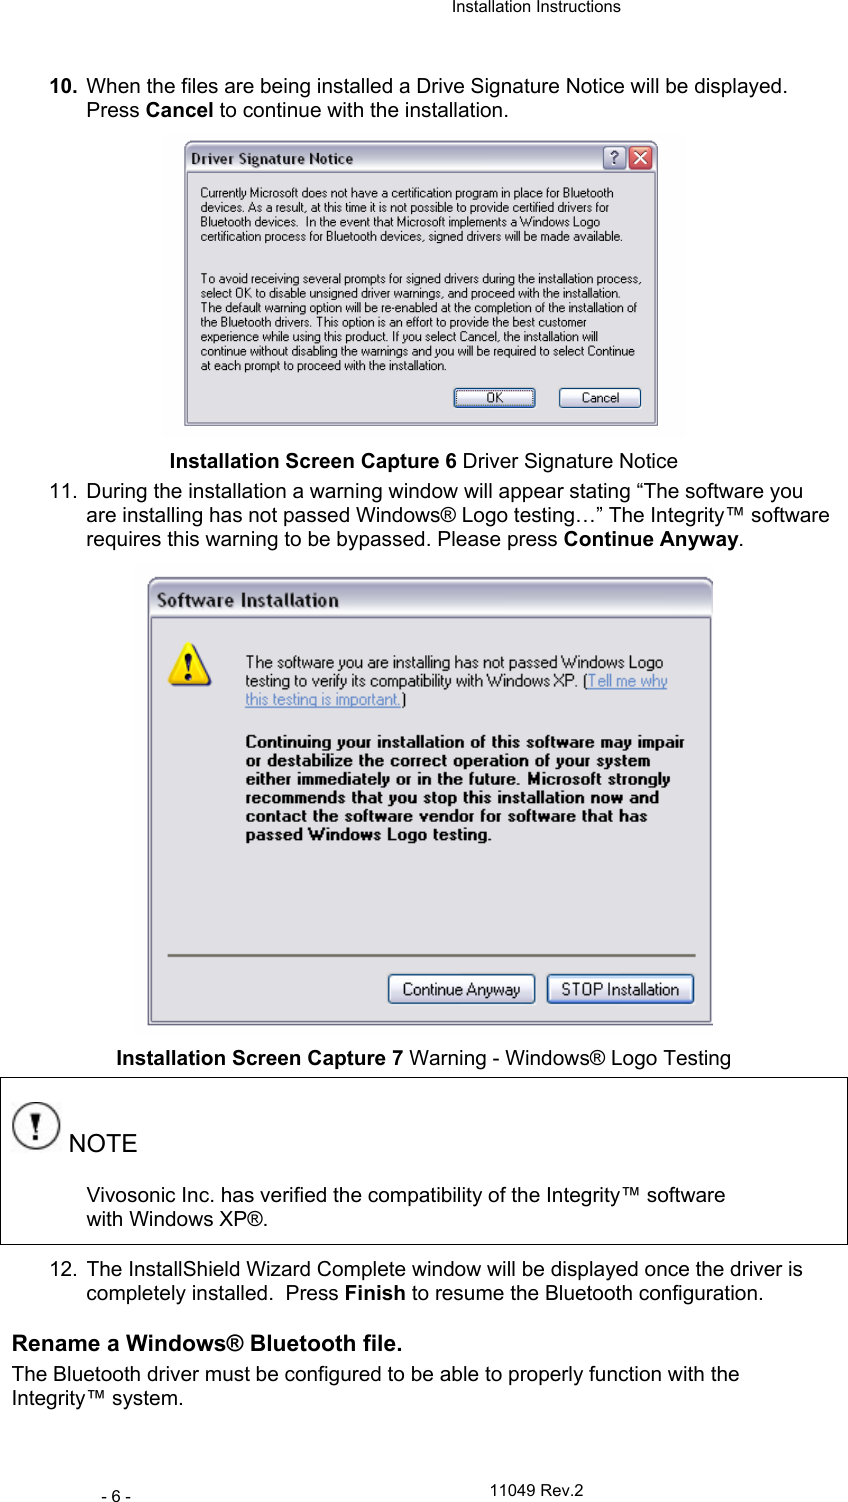  Installation Instructions   11049 Rev.2 - 6 - 10.  When the files are being installed a Drive Signature Notice will be displayed.  Press Cancel to continue with the installation.  Installation Screen Capture 6 Driver Signature Notice 11.  During the installation a warning window will appear stating “The software you are installing has not passed Windows® Logo testing…” The Integrity™ software requires this warning to be bypassed. Please press Continue Anyway.  Installation Screen Capture 7 Warning - Windows® Logo Testing  NOTE Vivosonic Inc. has verified the compatibility of the Integrity™ software with Windows XP®.  12.  The InstallShield Wizard Complete window will be displayed once the driver is completely installed.  Press Finish to resume the Bluetooth configuration. Rename a Windows® Bluetooth file. The Bluetooth driver must be configured to be able to properly function with the Integrity™ system. 